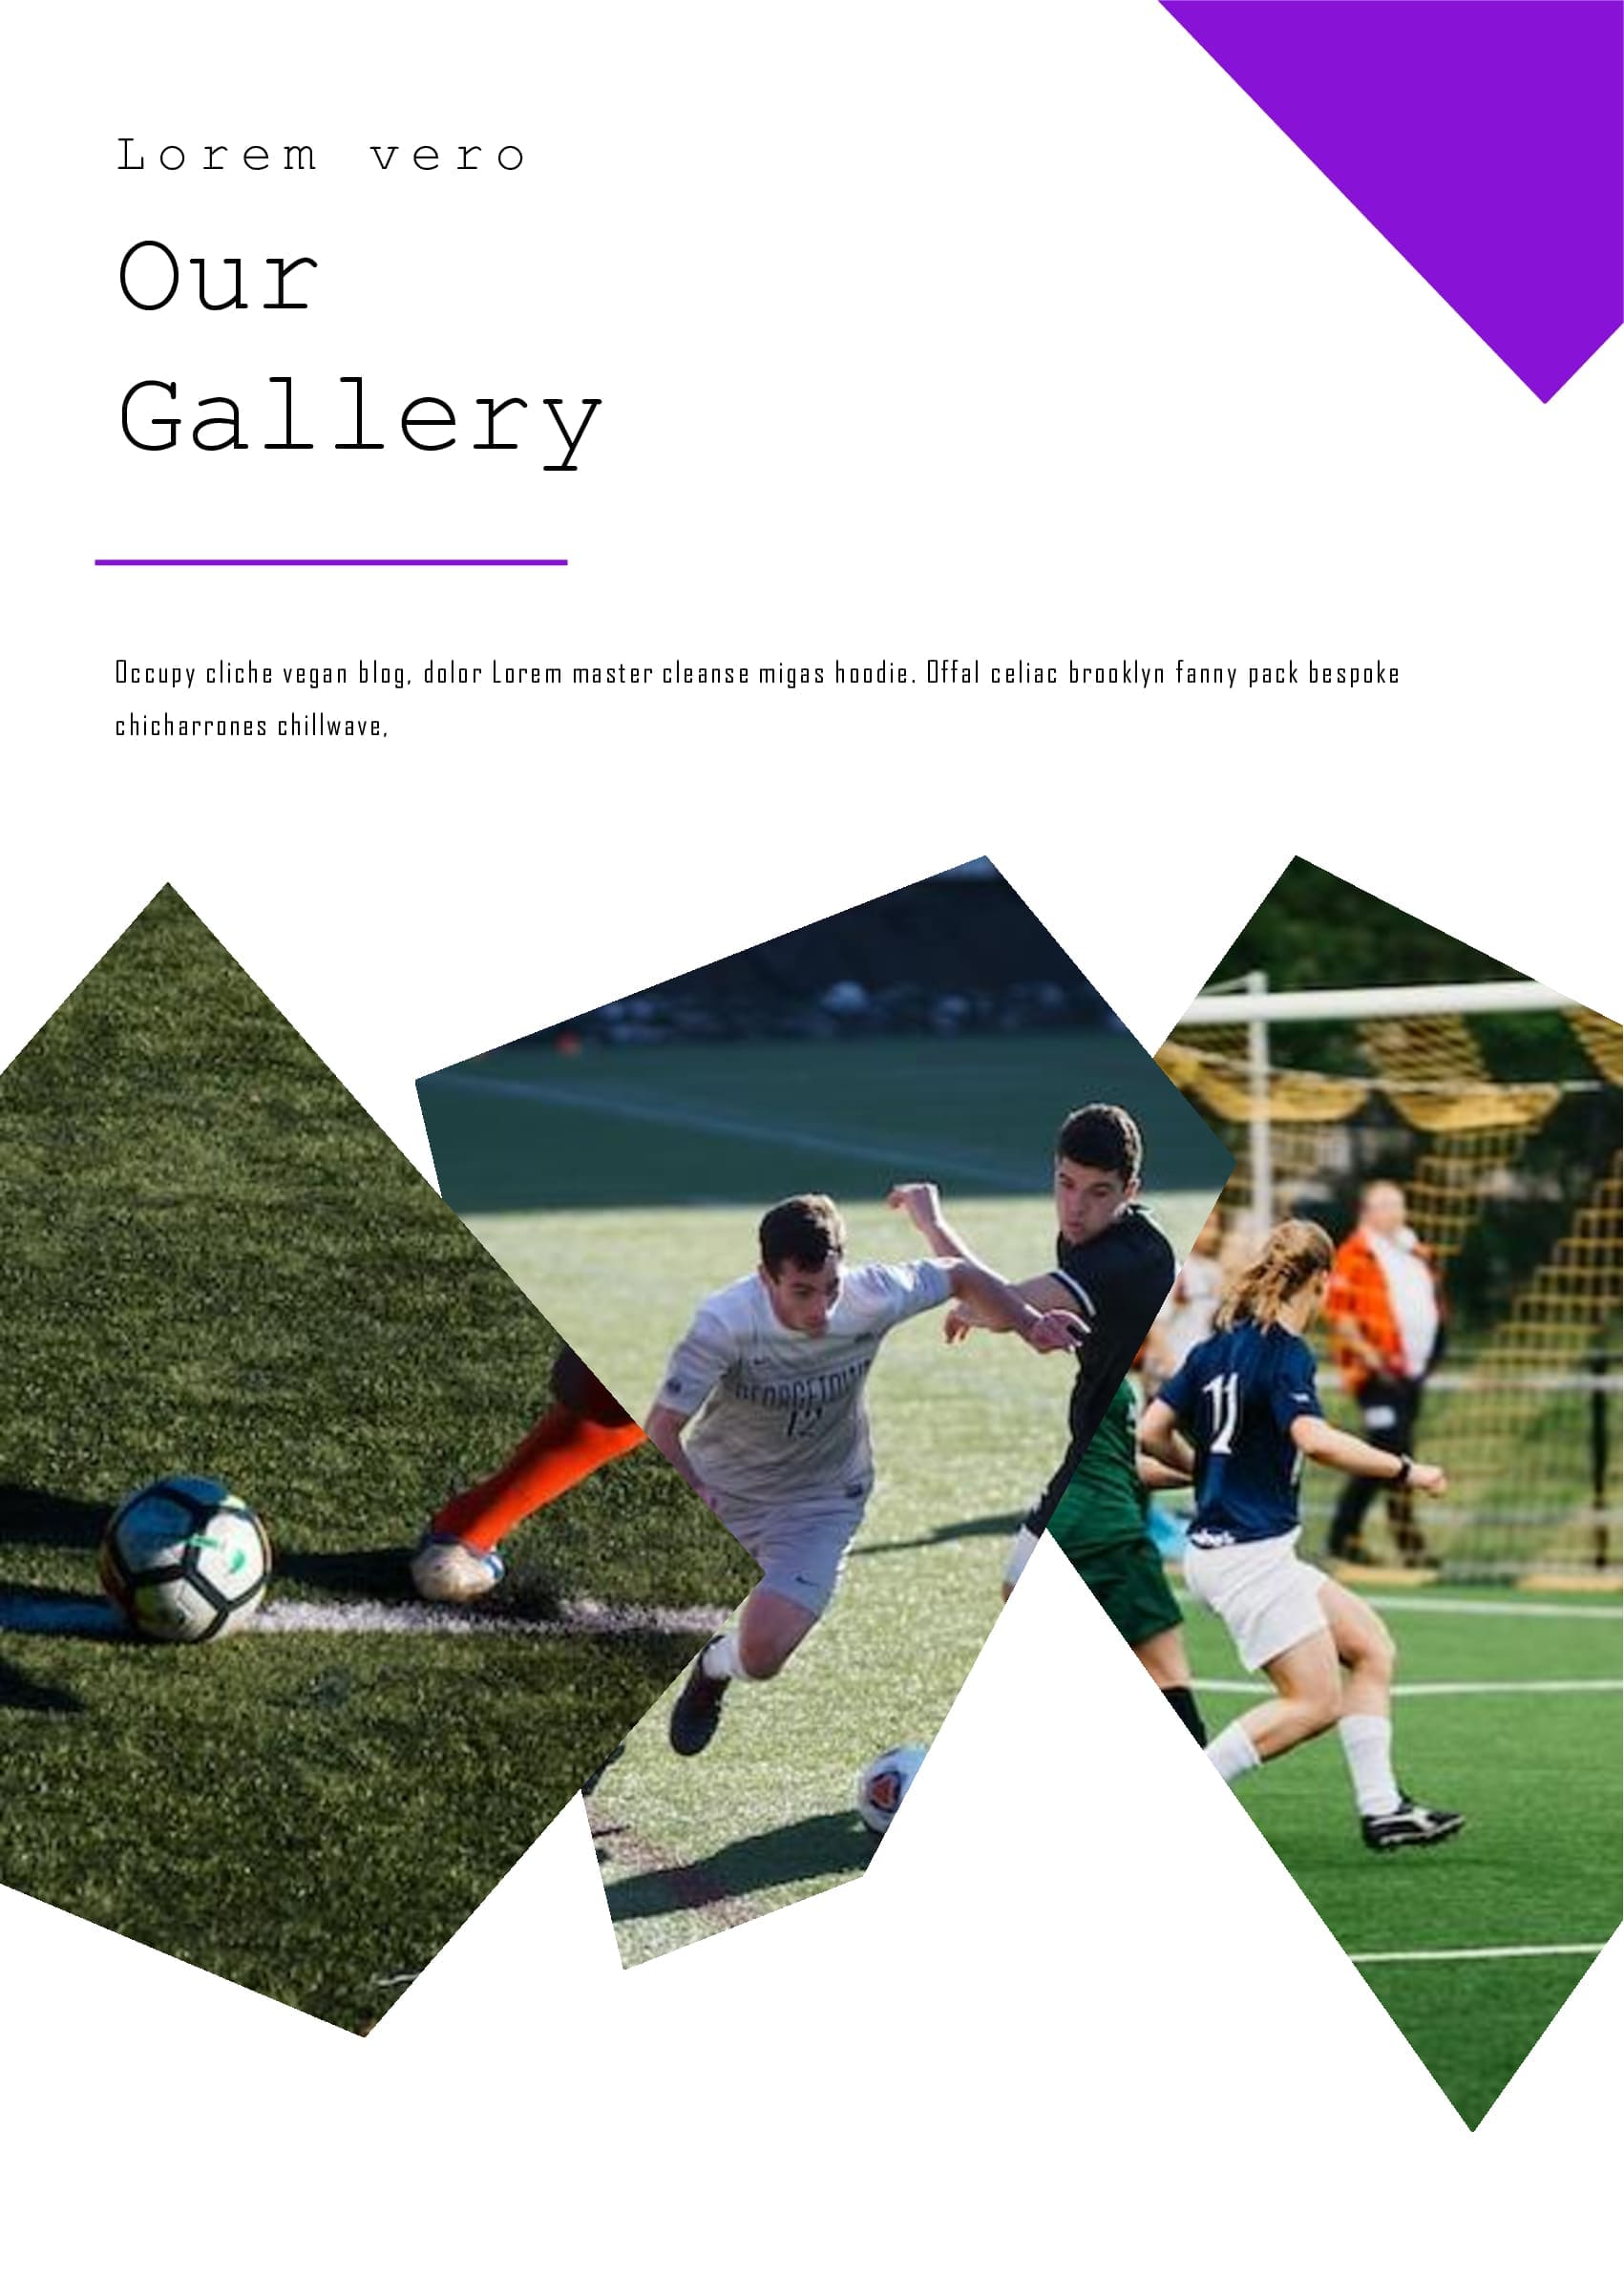 A gallery with an image of a football game.